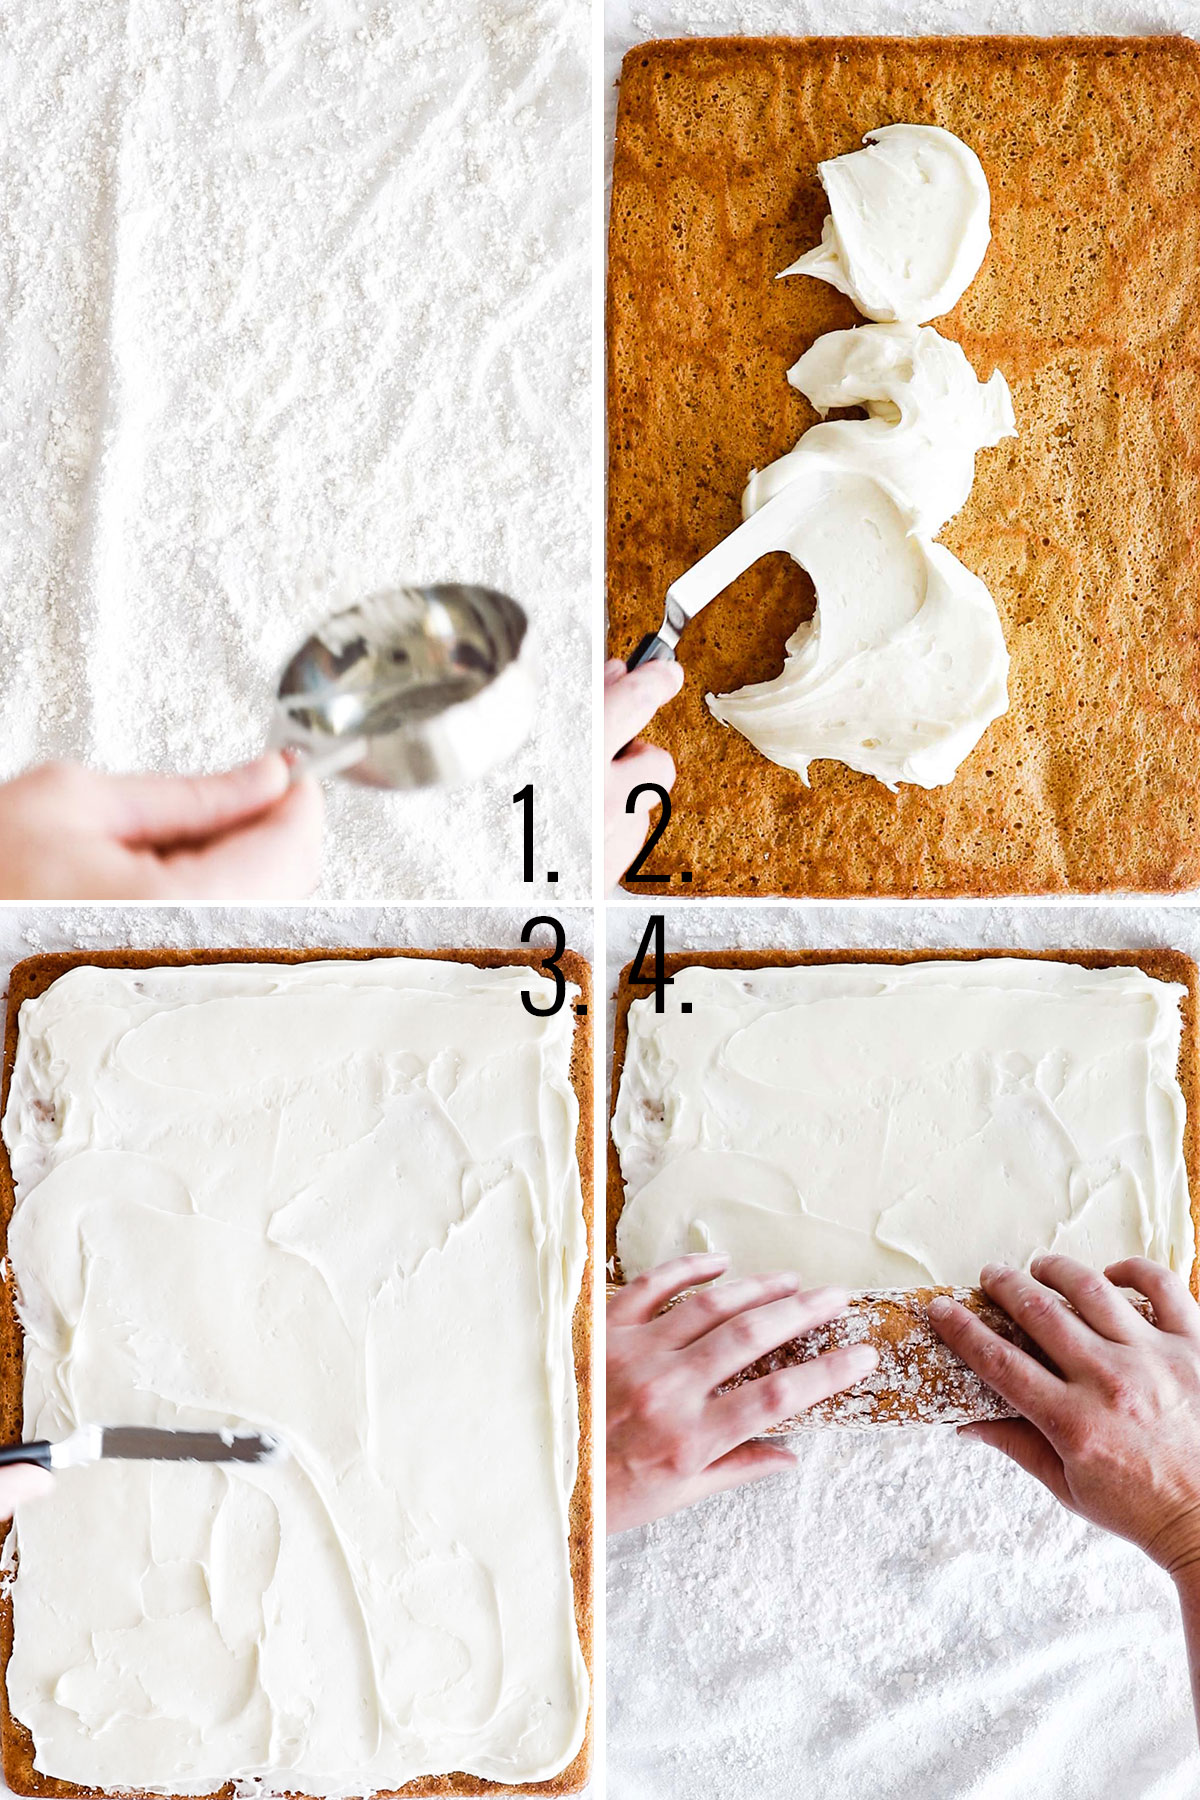 4 process shots of spreading cream cheese frosting on cake and rolling up the cake
